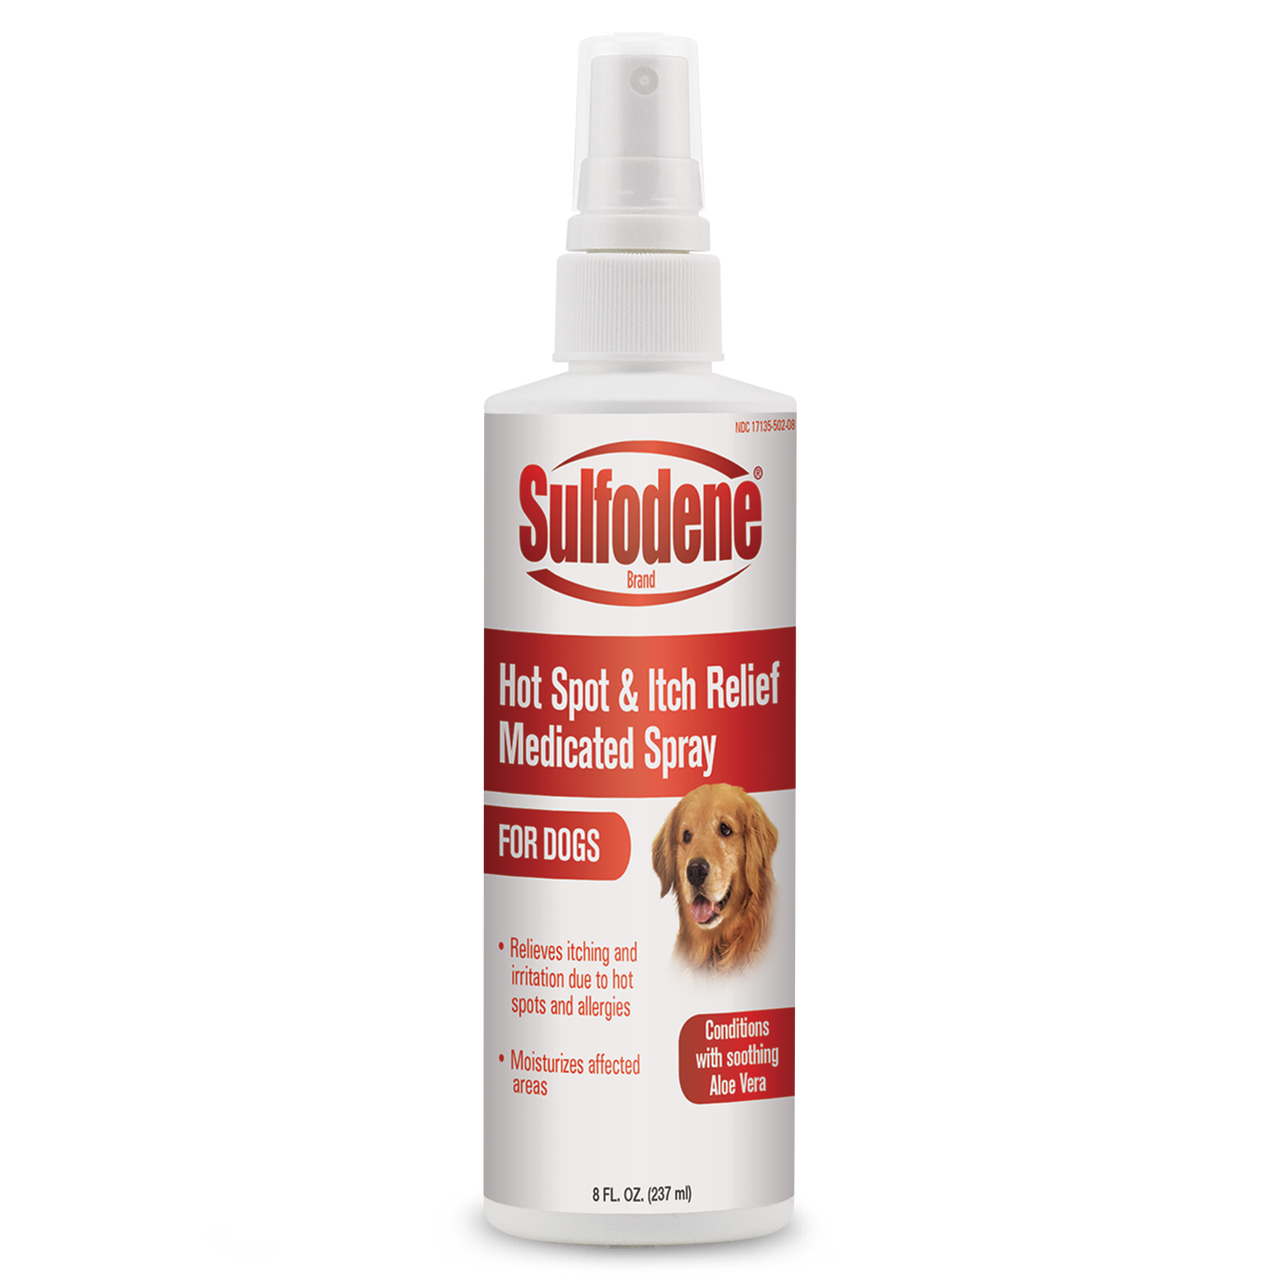 Sulfodene Hot Spot & Itch Relief Medicated Spray for Dog 8oz